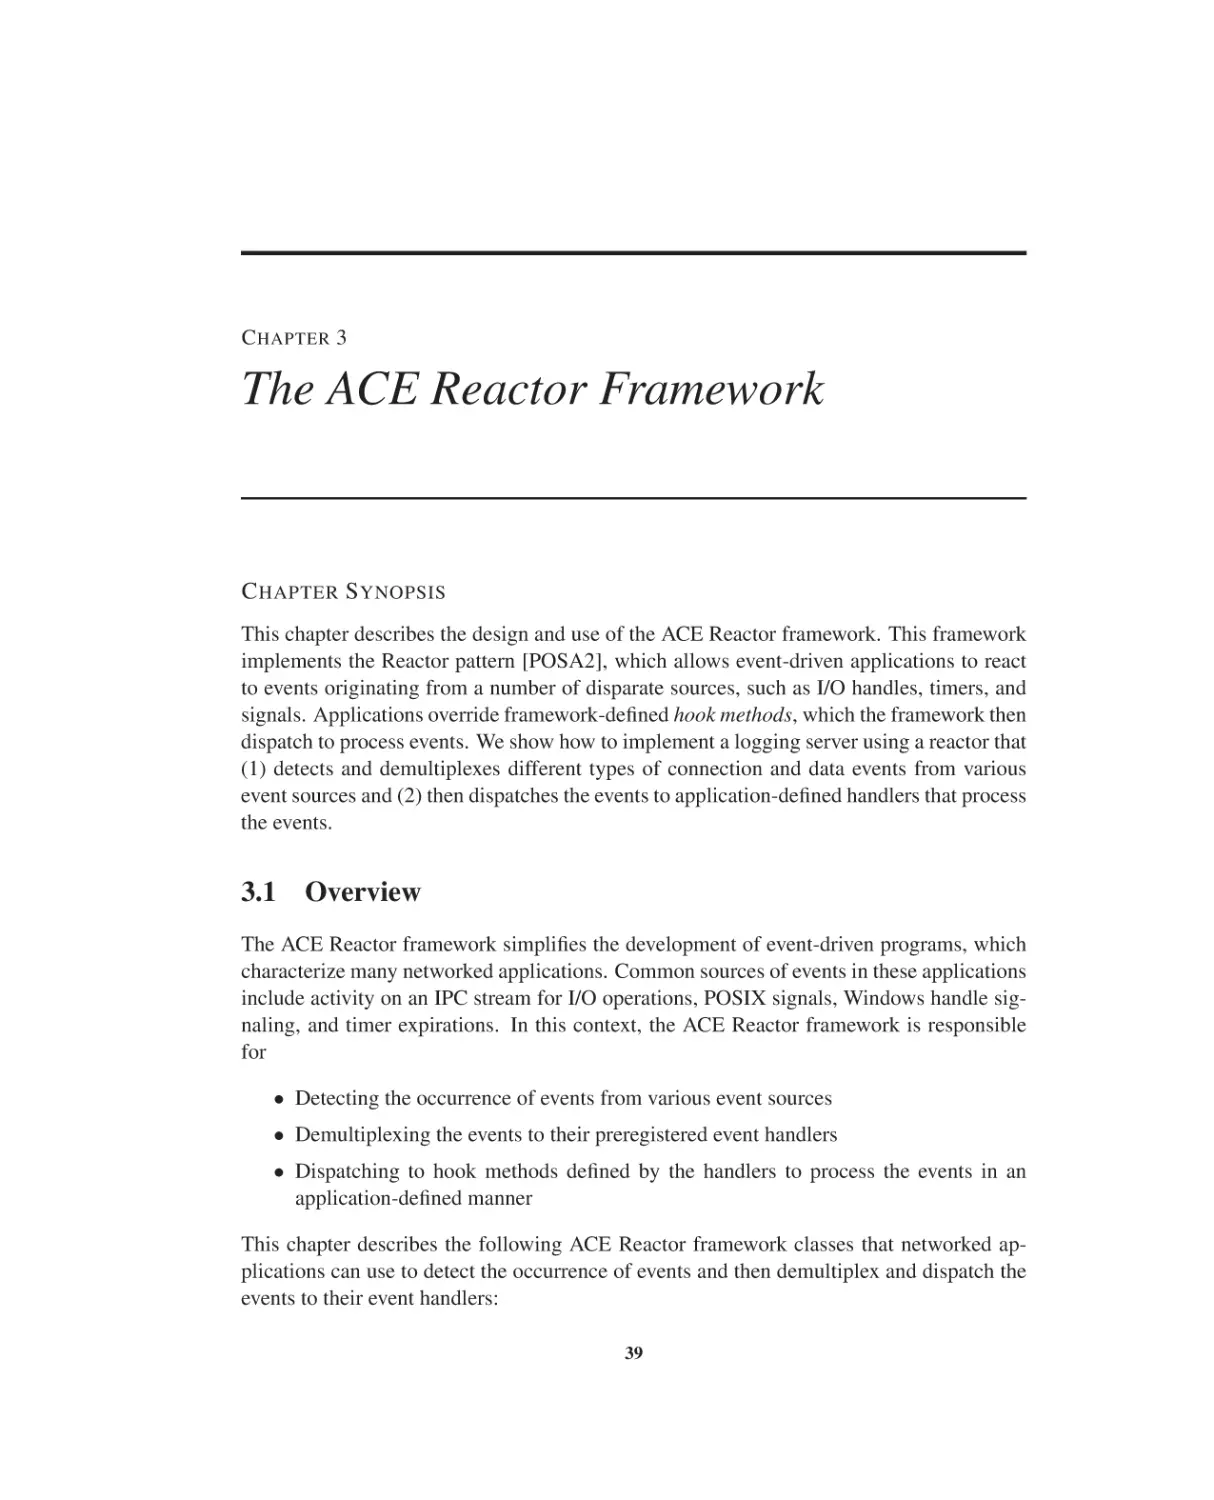 Chapter 3 The ACE Reactor Framework
3.1 Overview